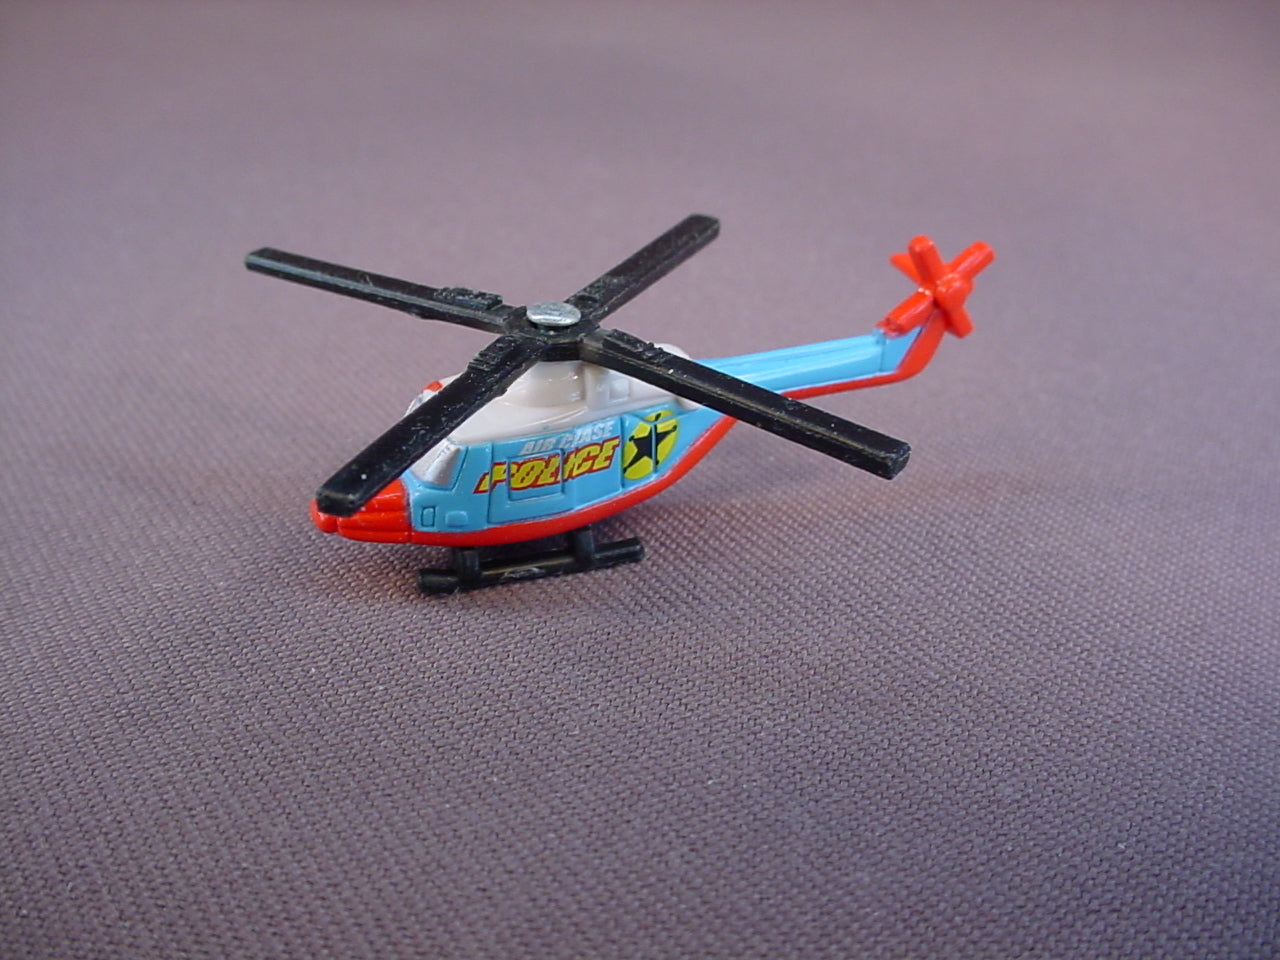 Micro Machines Hot Wheels Westland Lynx Police Helicopter, Micro Atomix Rescue, Plastic, 1:87 Scale, C6456, 2004 Mattel